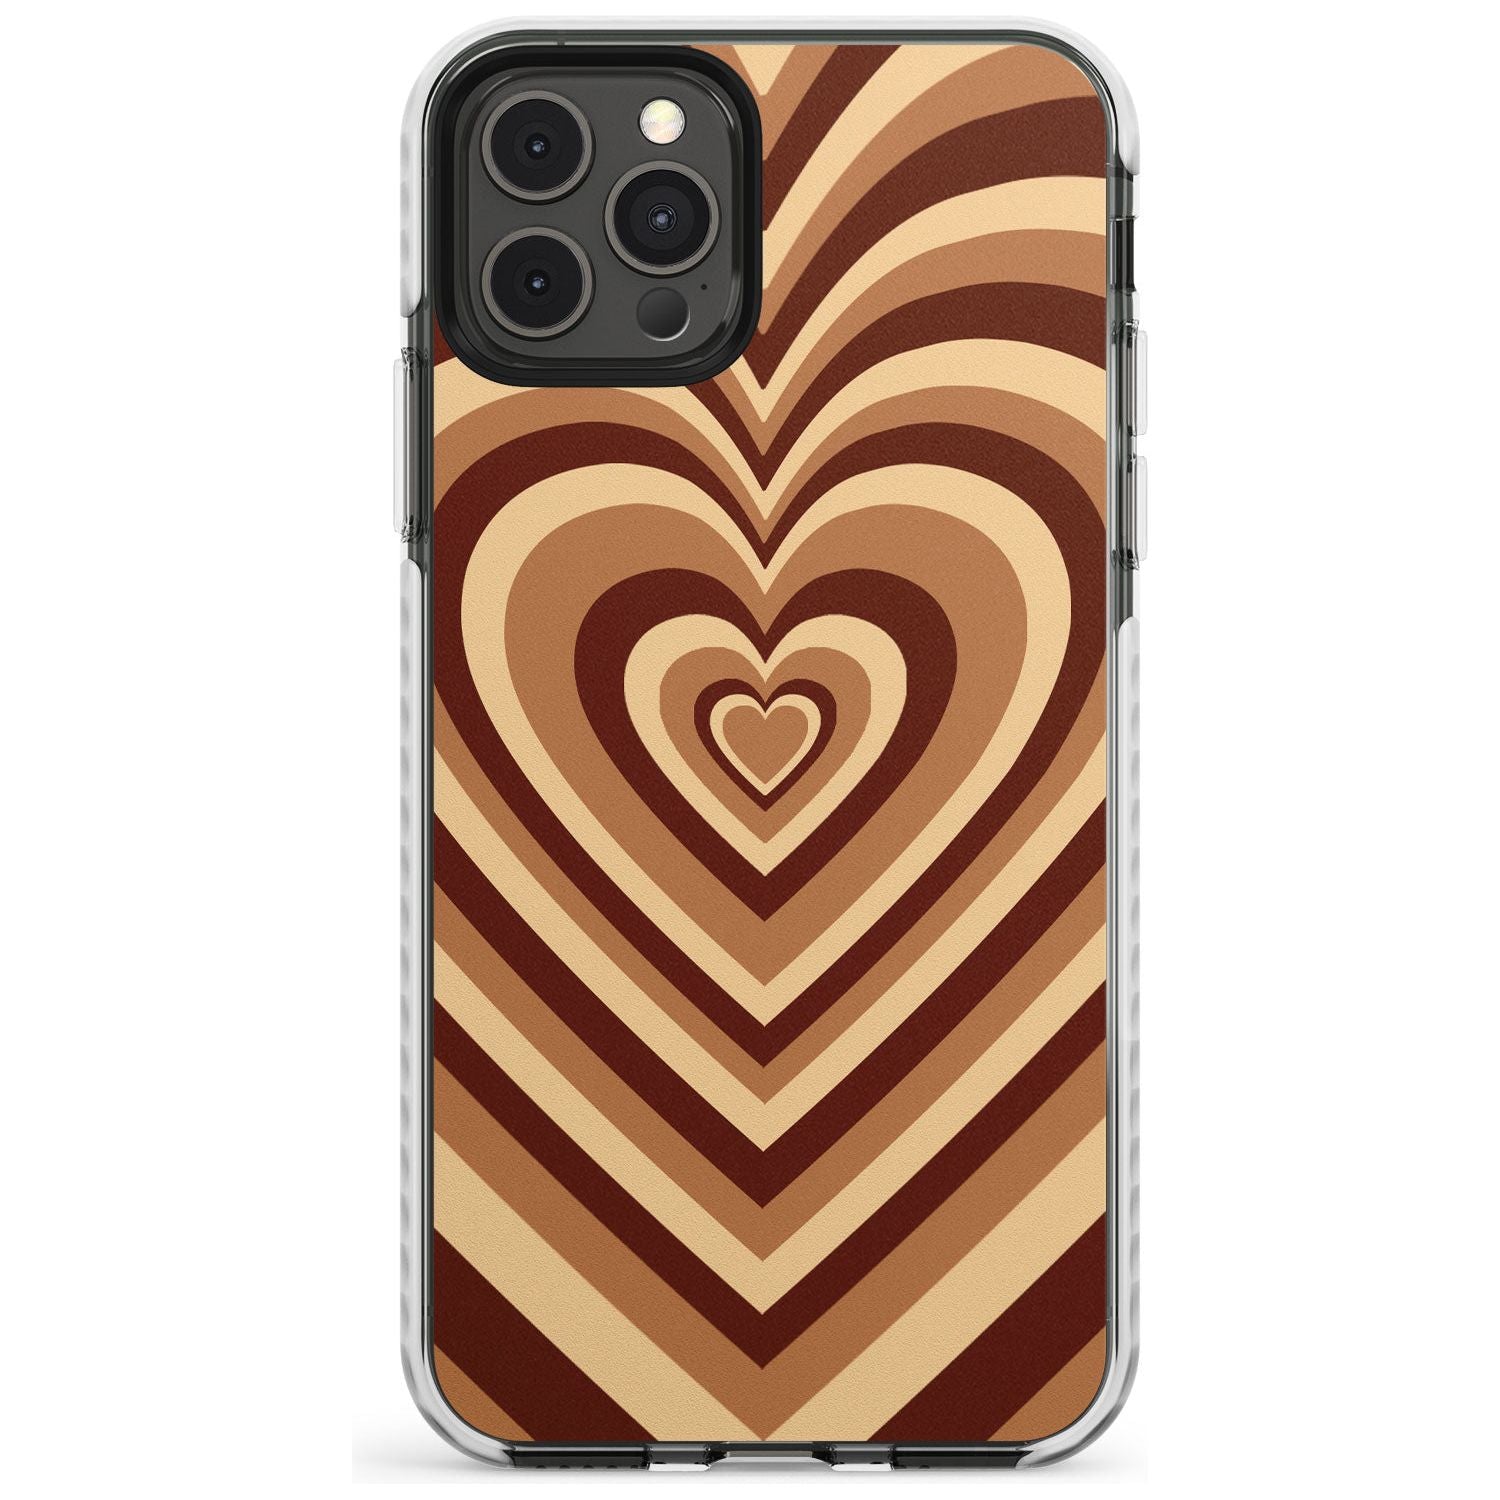 Latte Heart Illusion Impact Phone Case for iPhone 11 Pro Max